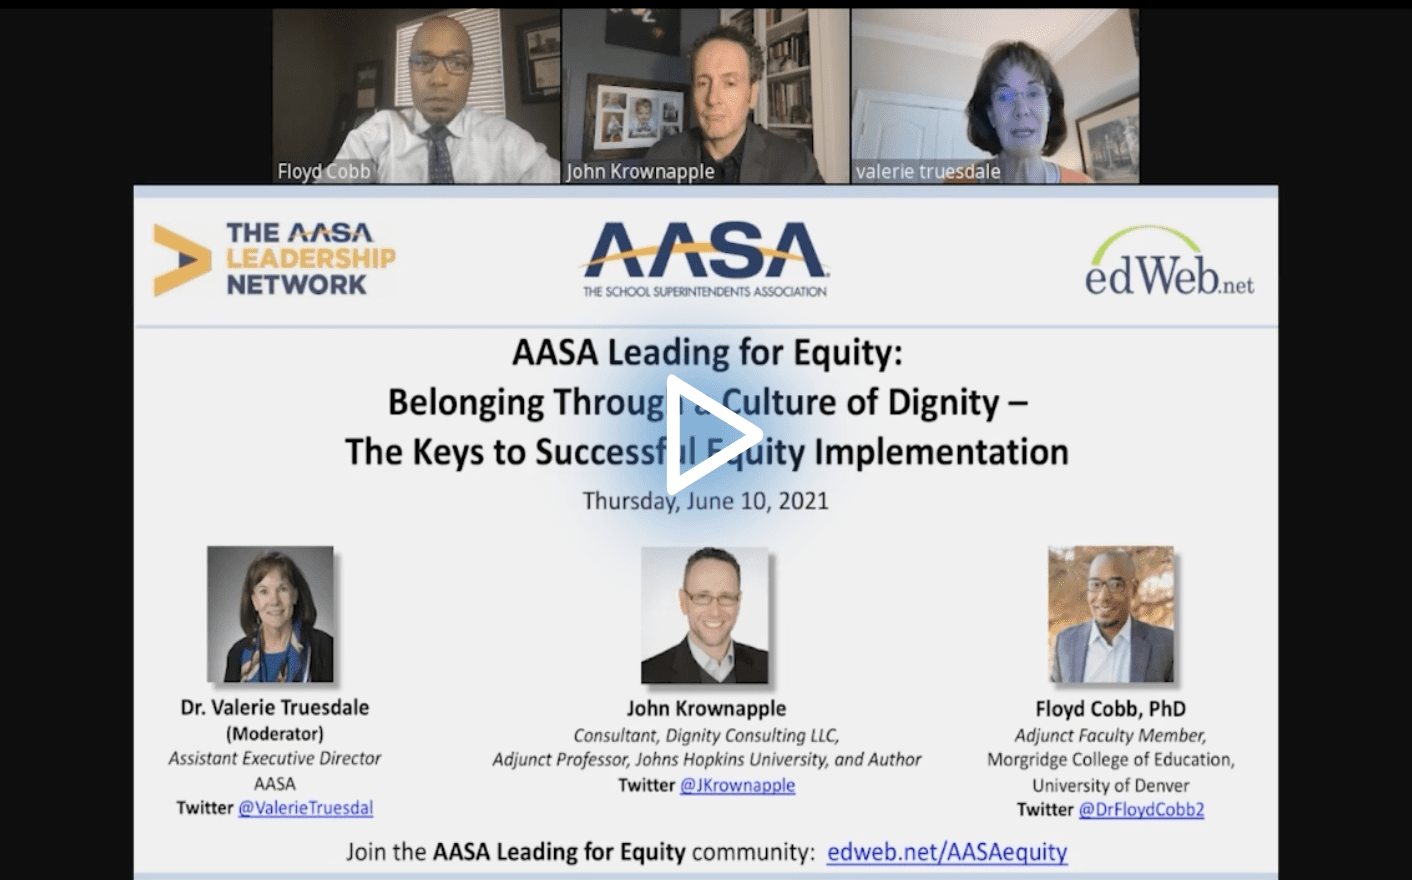 AASA Leading for Equity: Belonging Through a Culture of Dignity – The Keys to Successful Equity Implementation edWebinar recording link